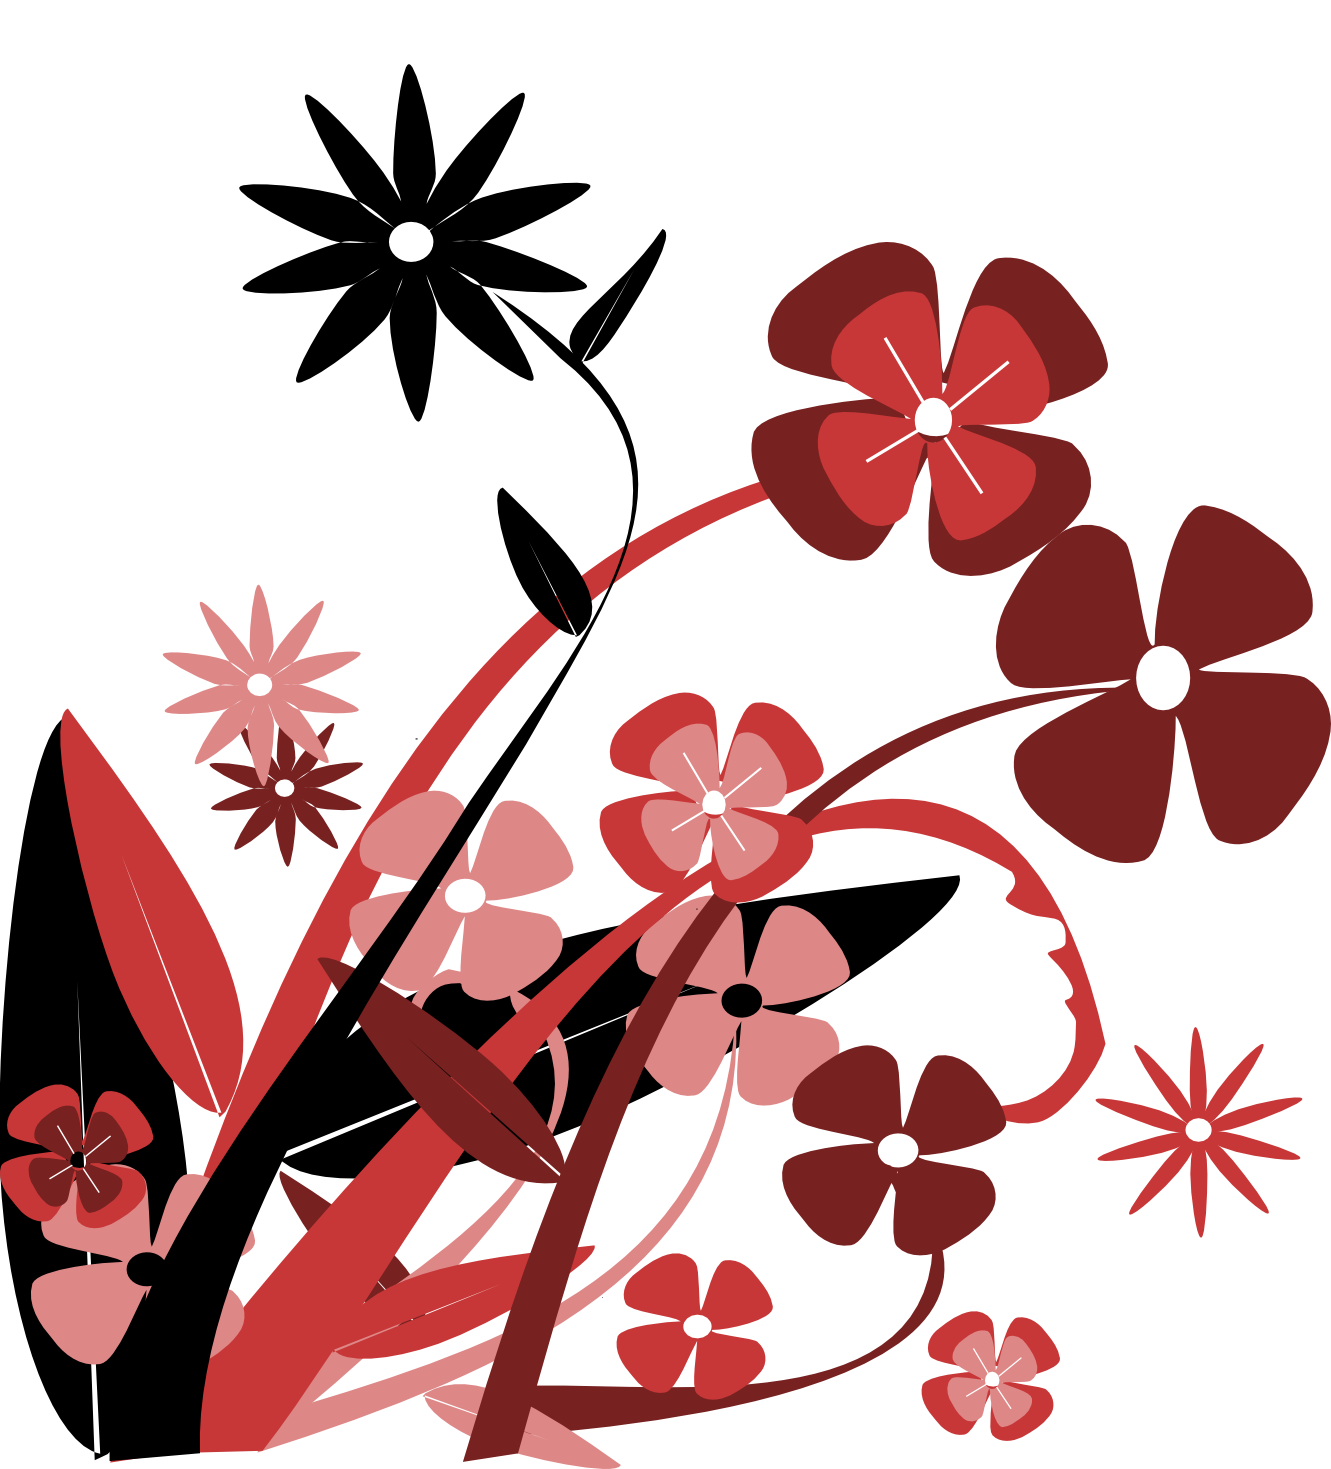 Flower vector png - Imagui